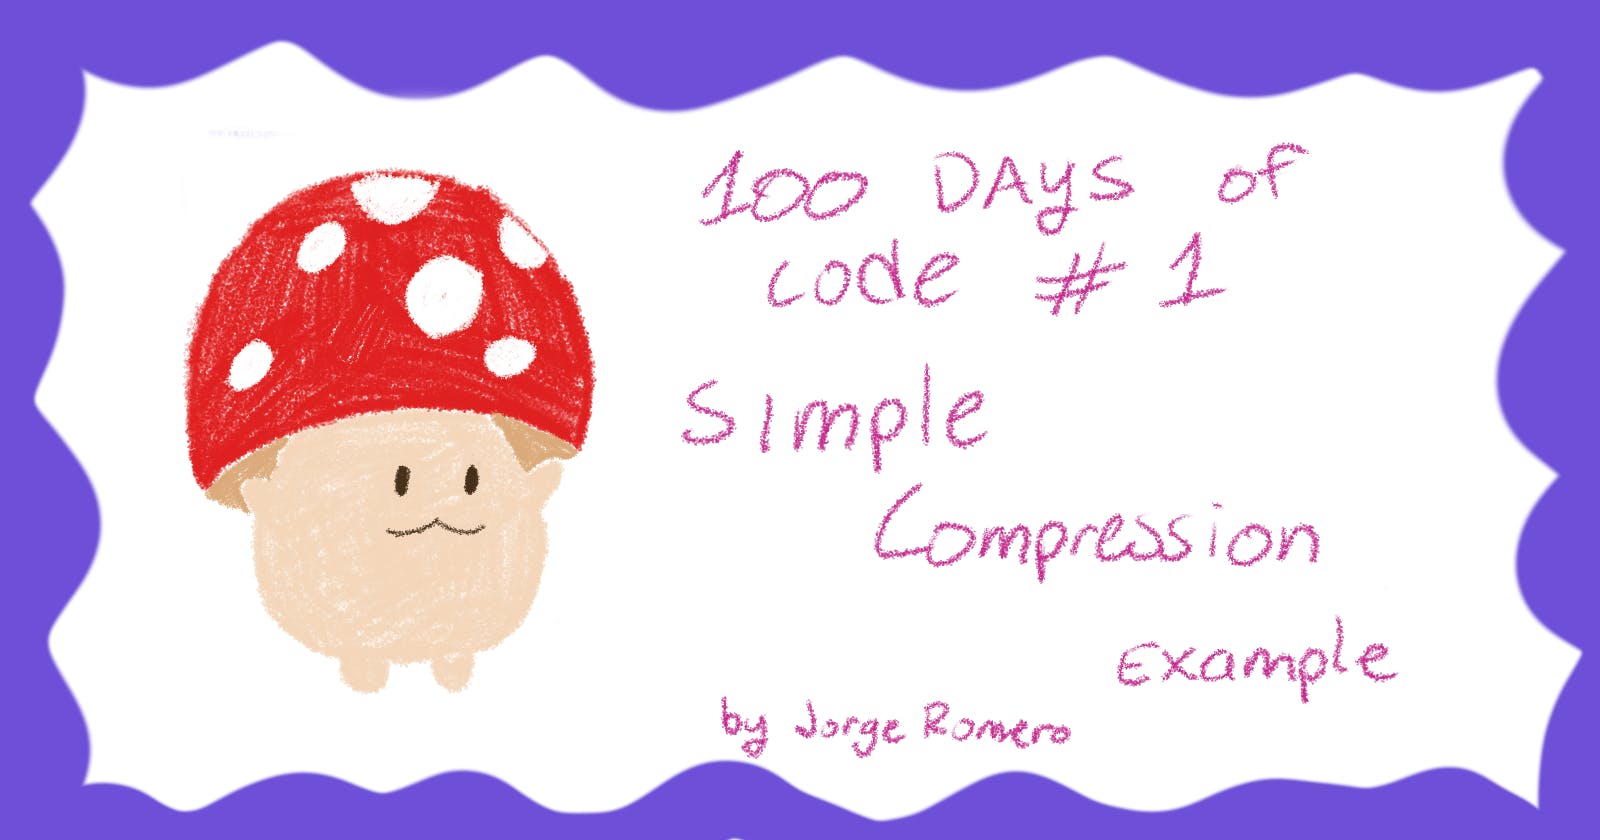 100 days of code #1: A simple compression example